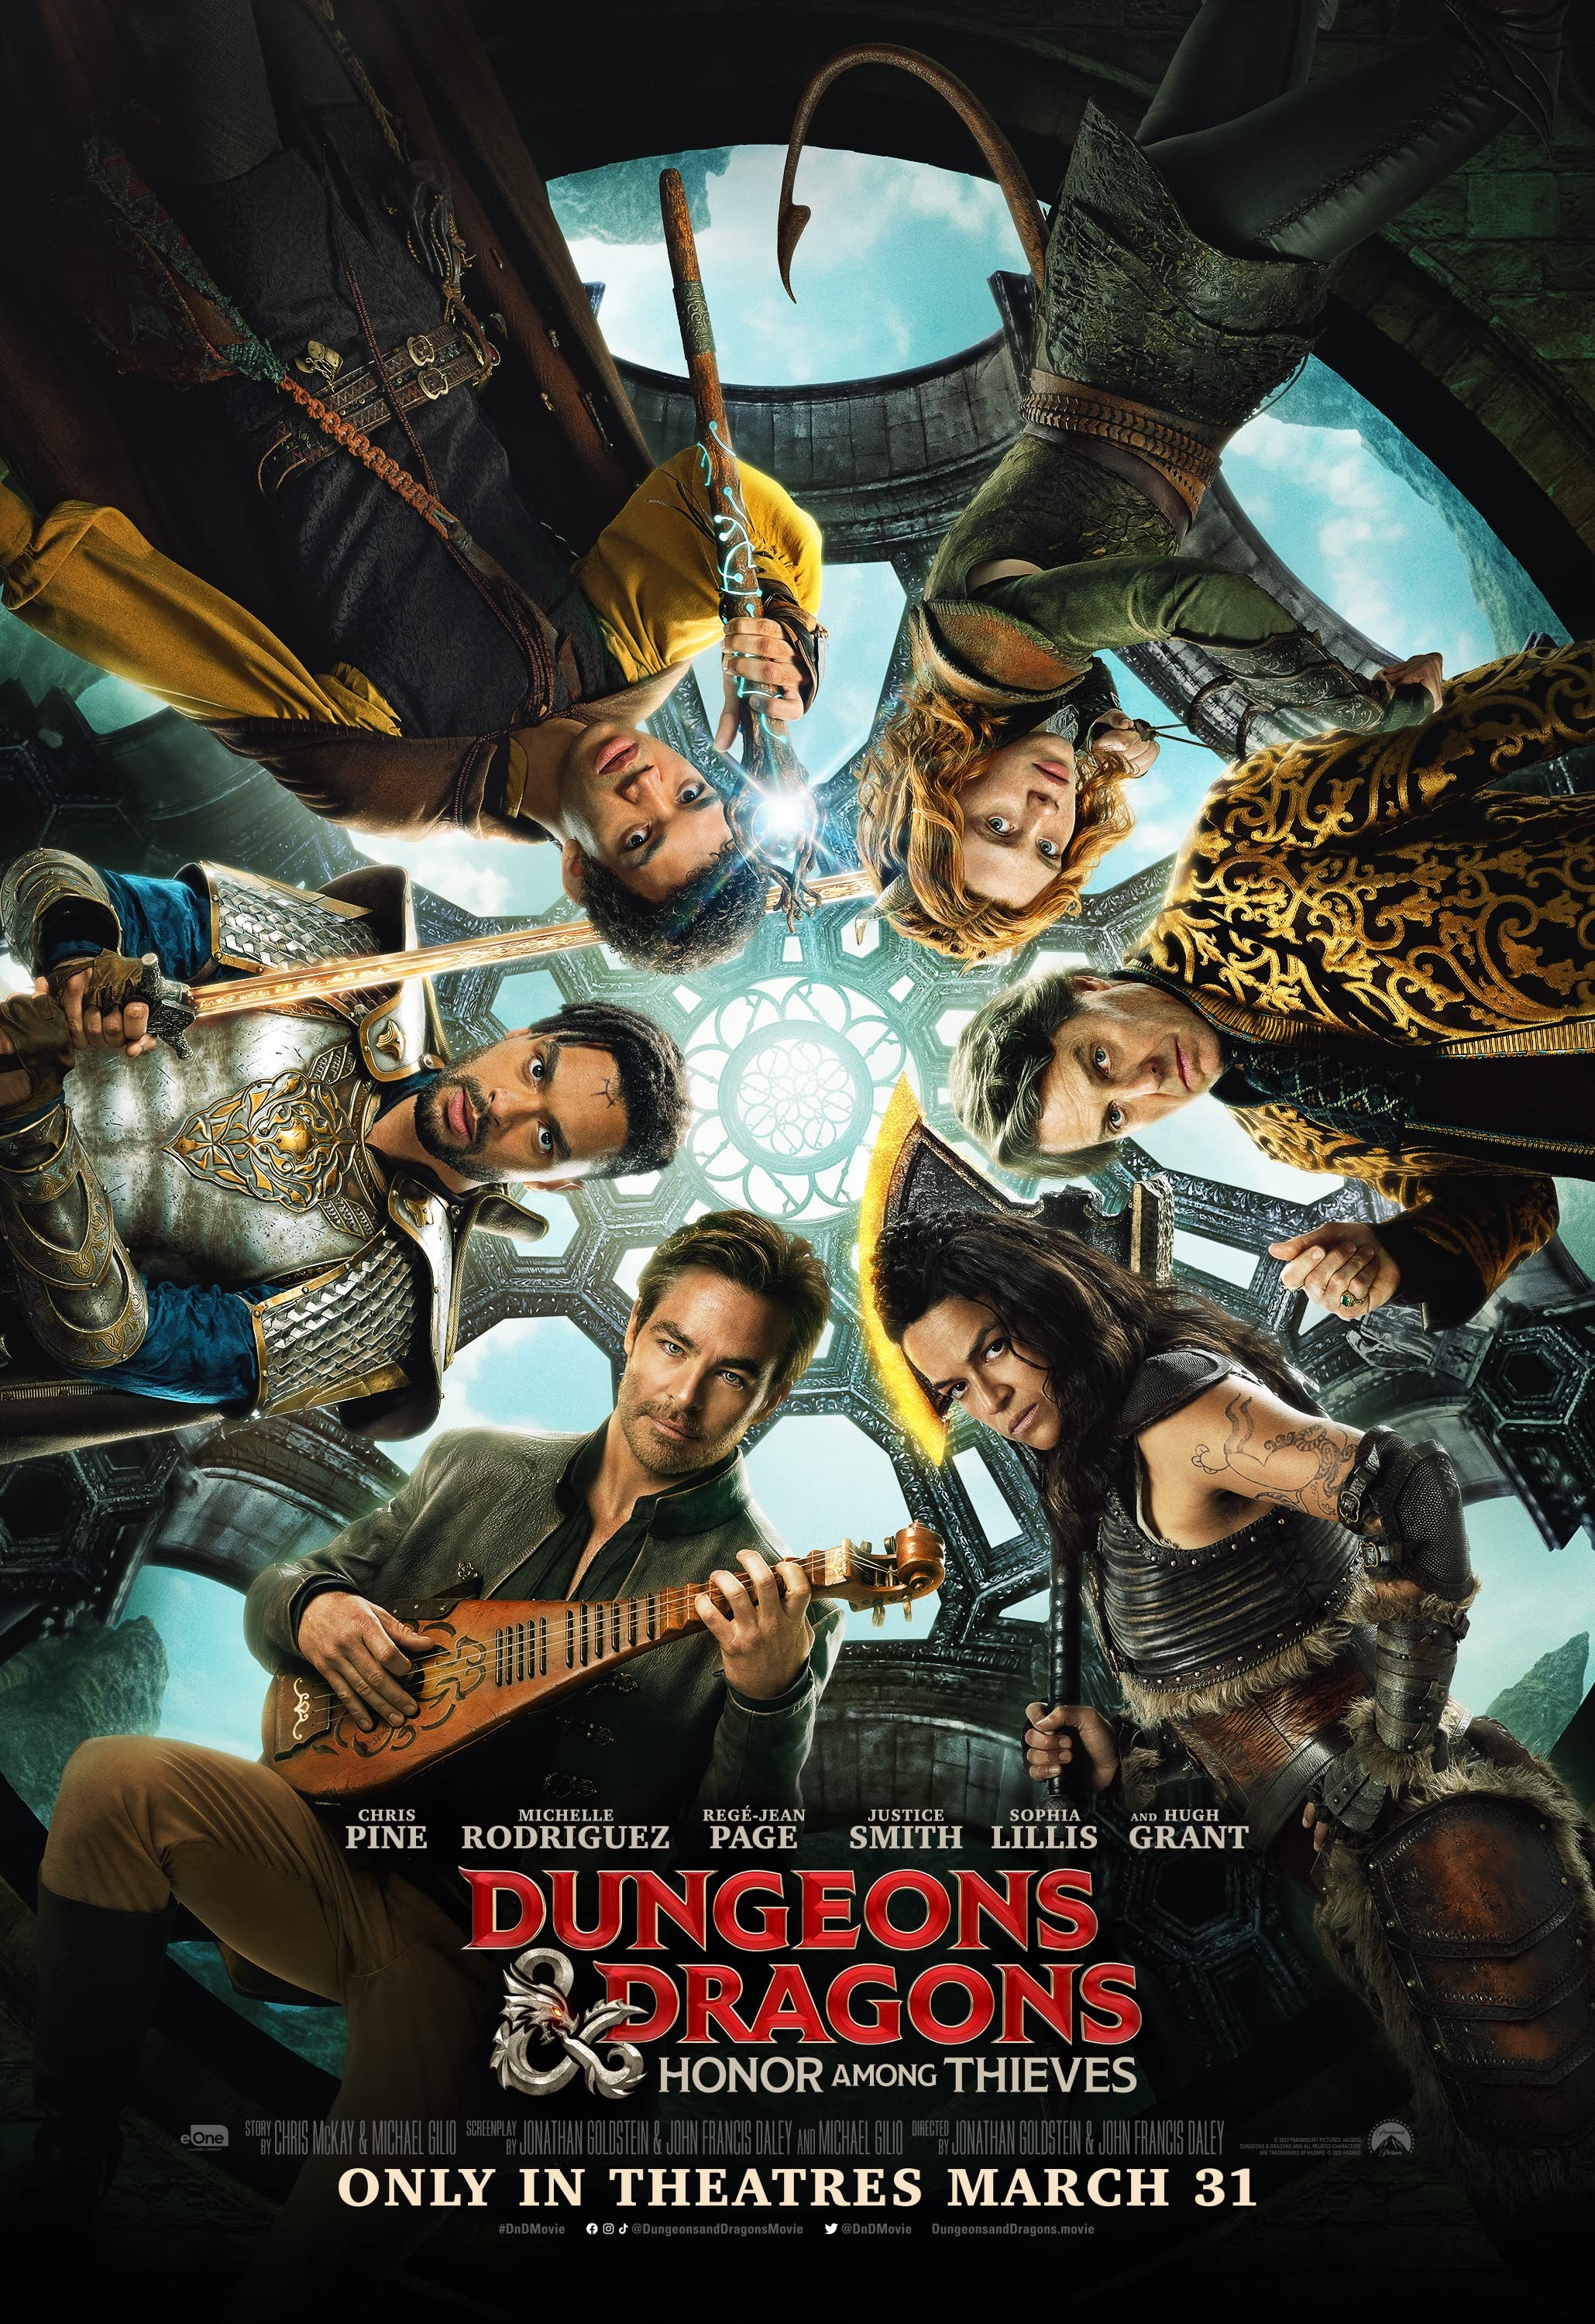 Dungeons and Dragons: Honor Among Thieves: Dungeons, Dragons, Thieves, Oh My